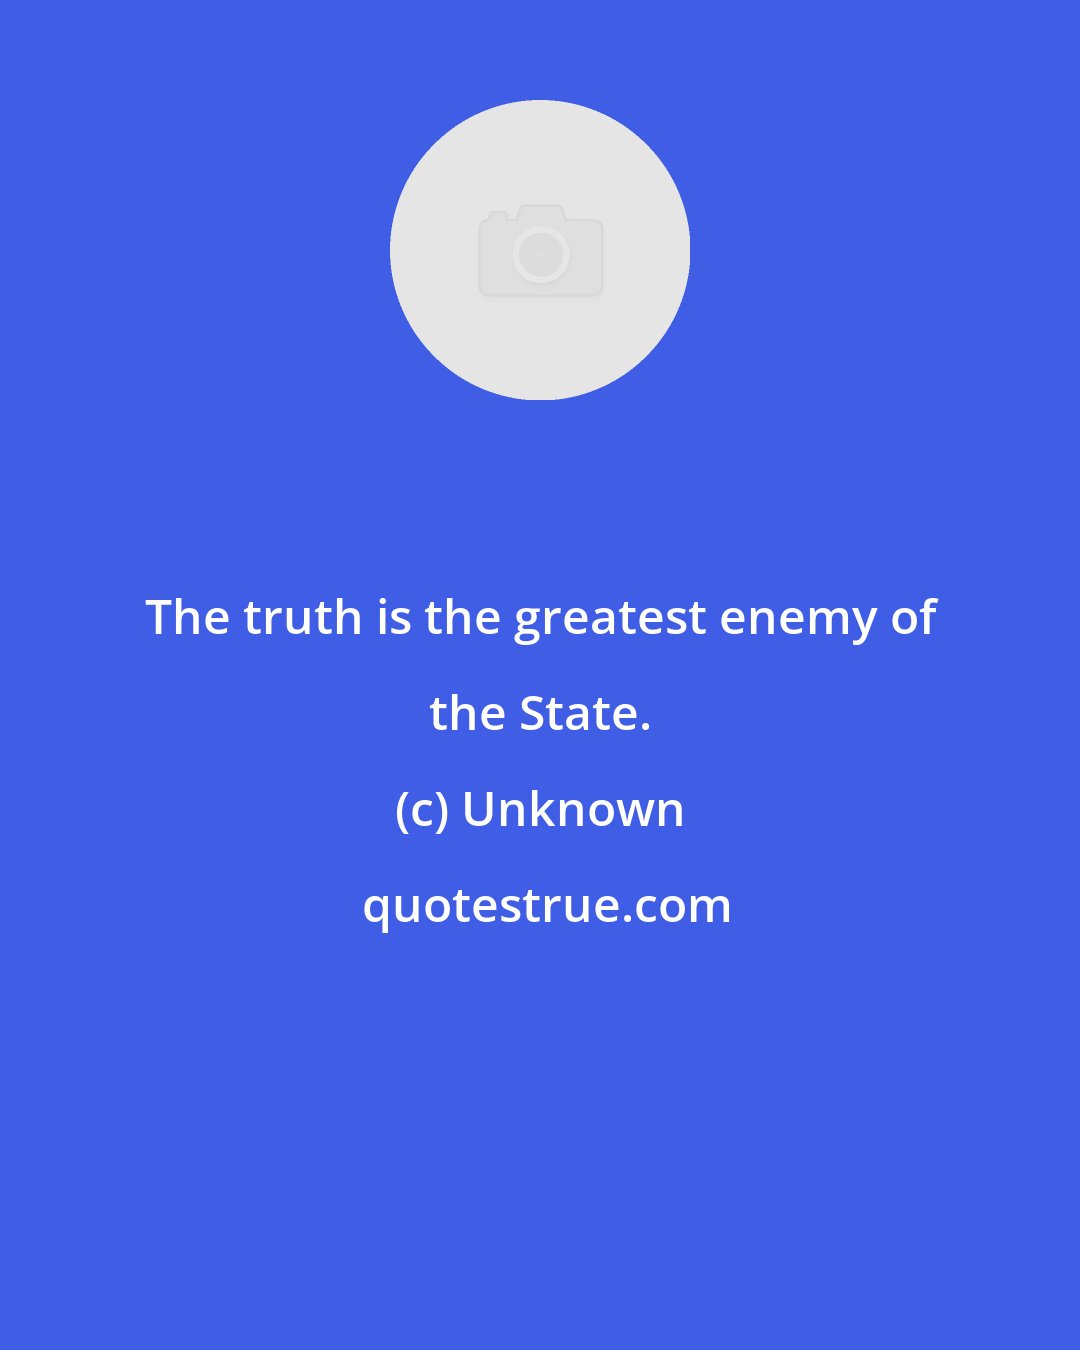 Unknown: The truth is the greatest enemy of the State.